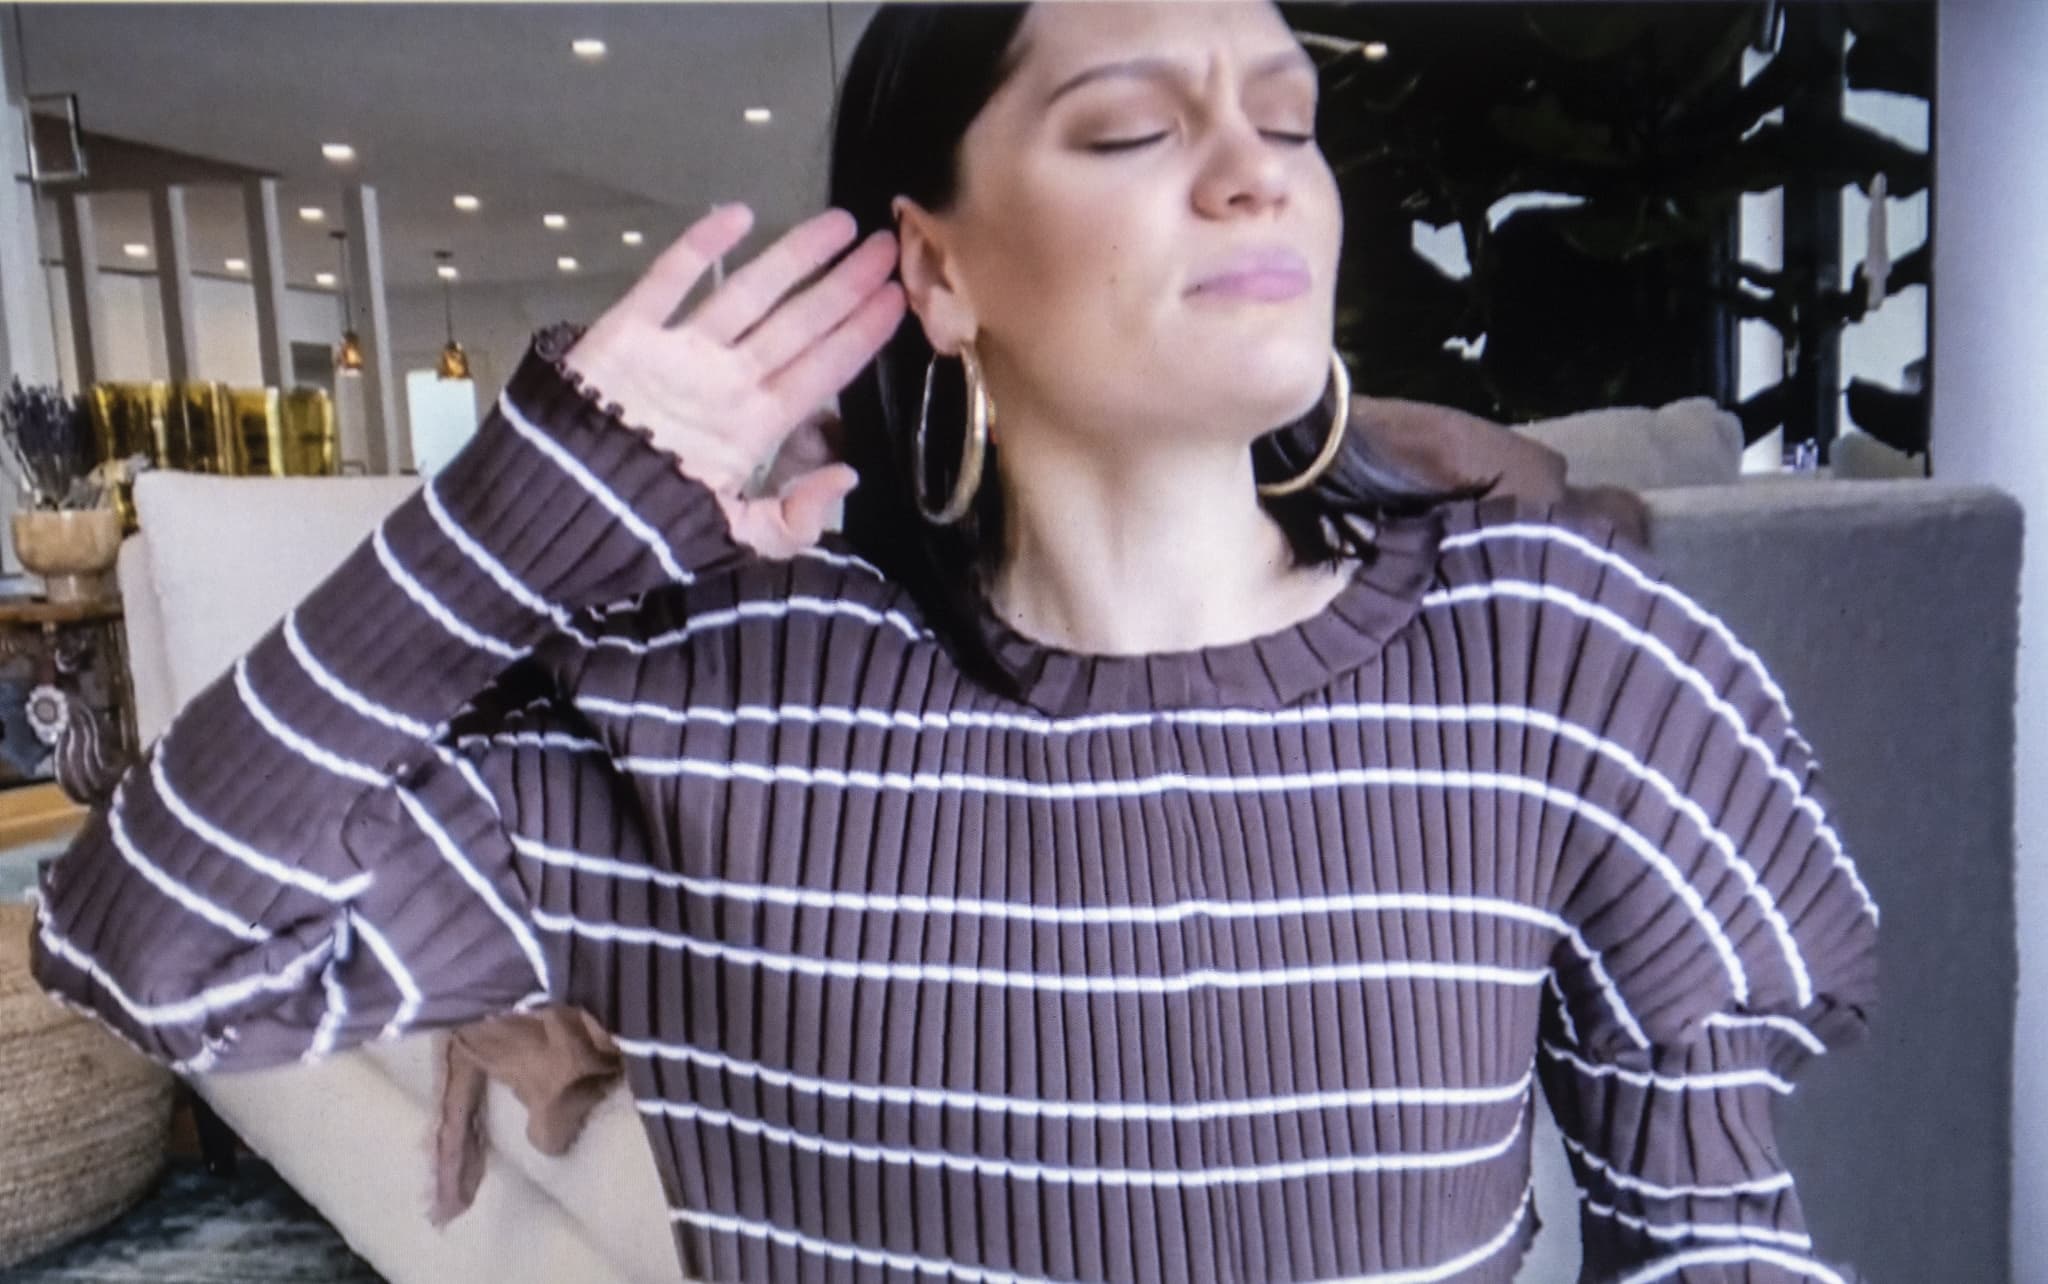 British singer Jessie J recently has been diagnosed with Ménière’s disease